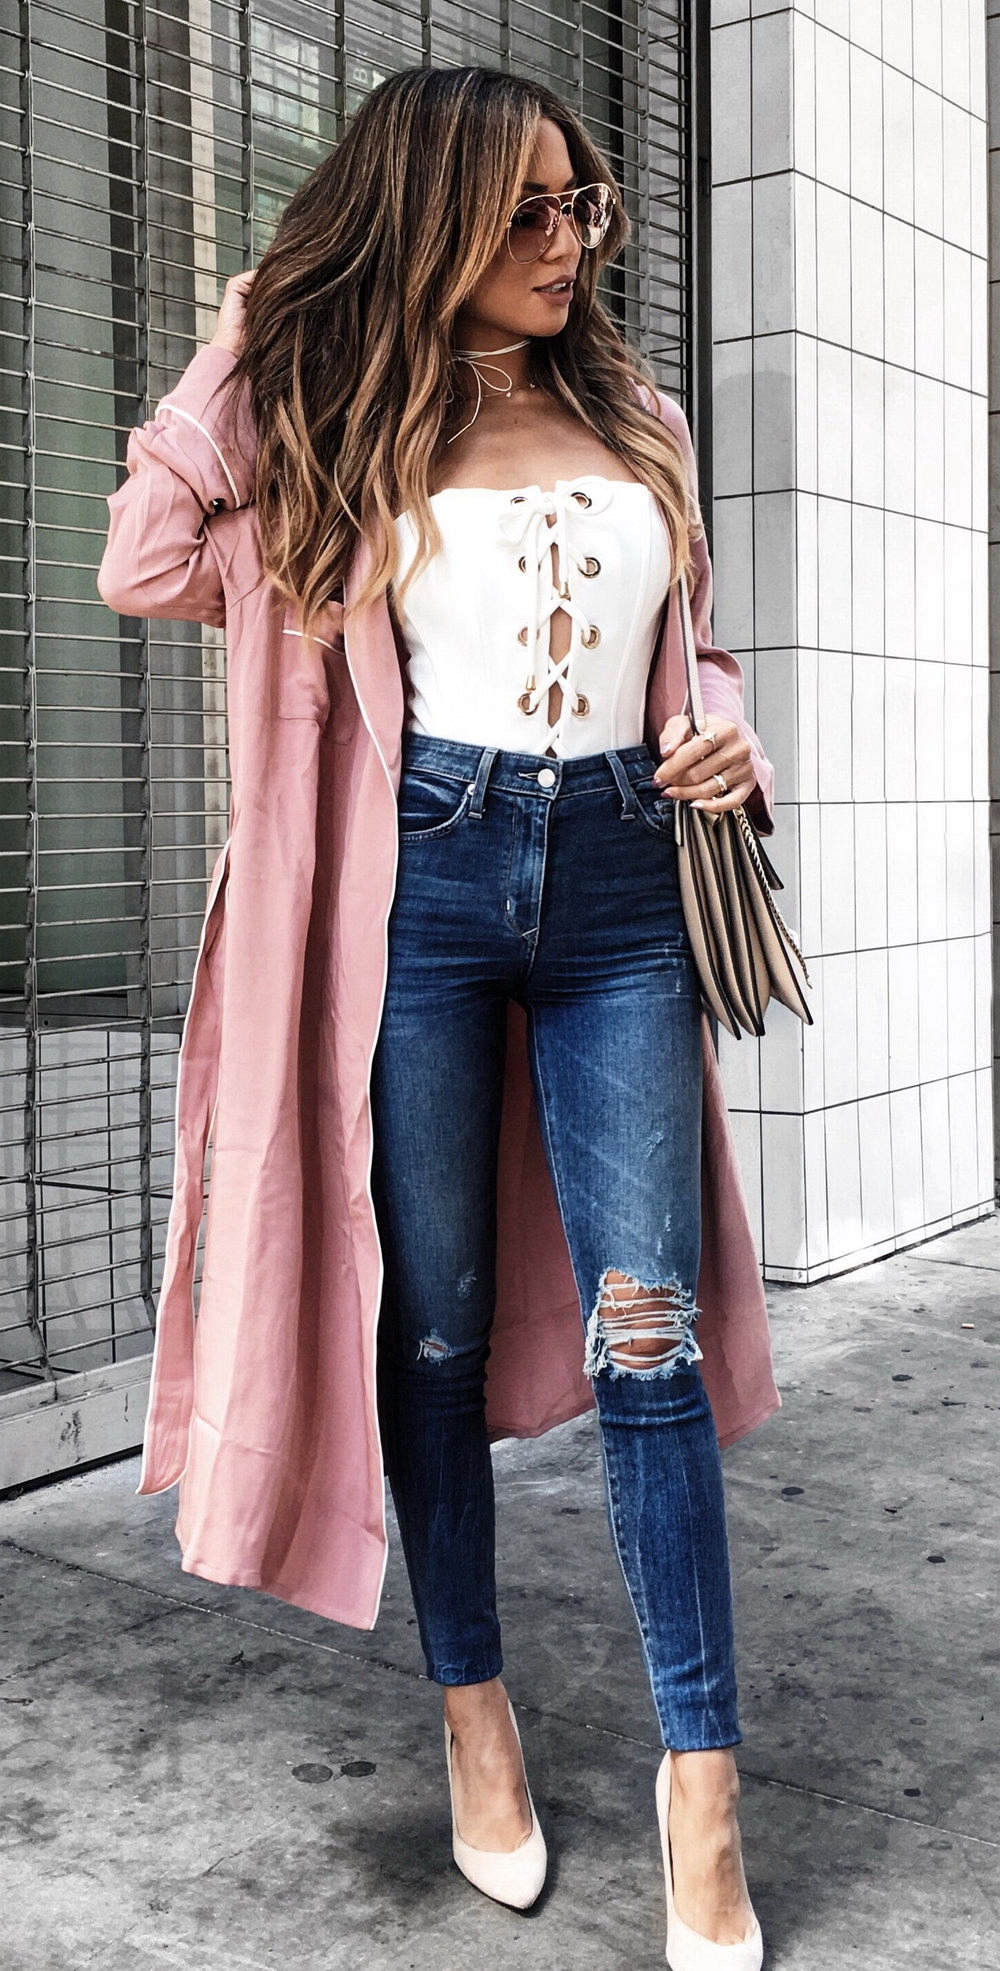 35 Stylish Outfit Ideas for Women – Outfit Inspirations - crazyforus